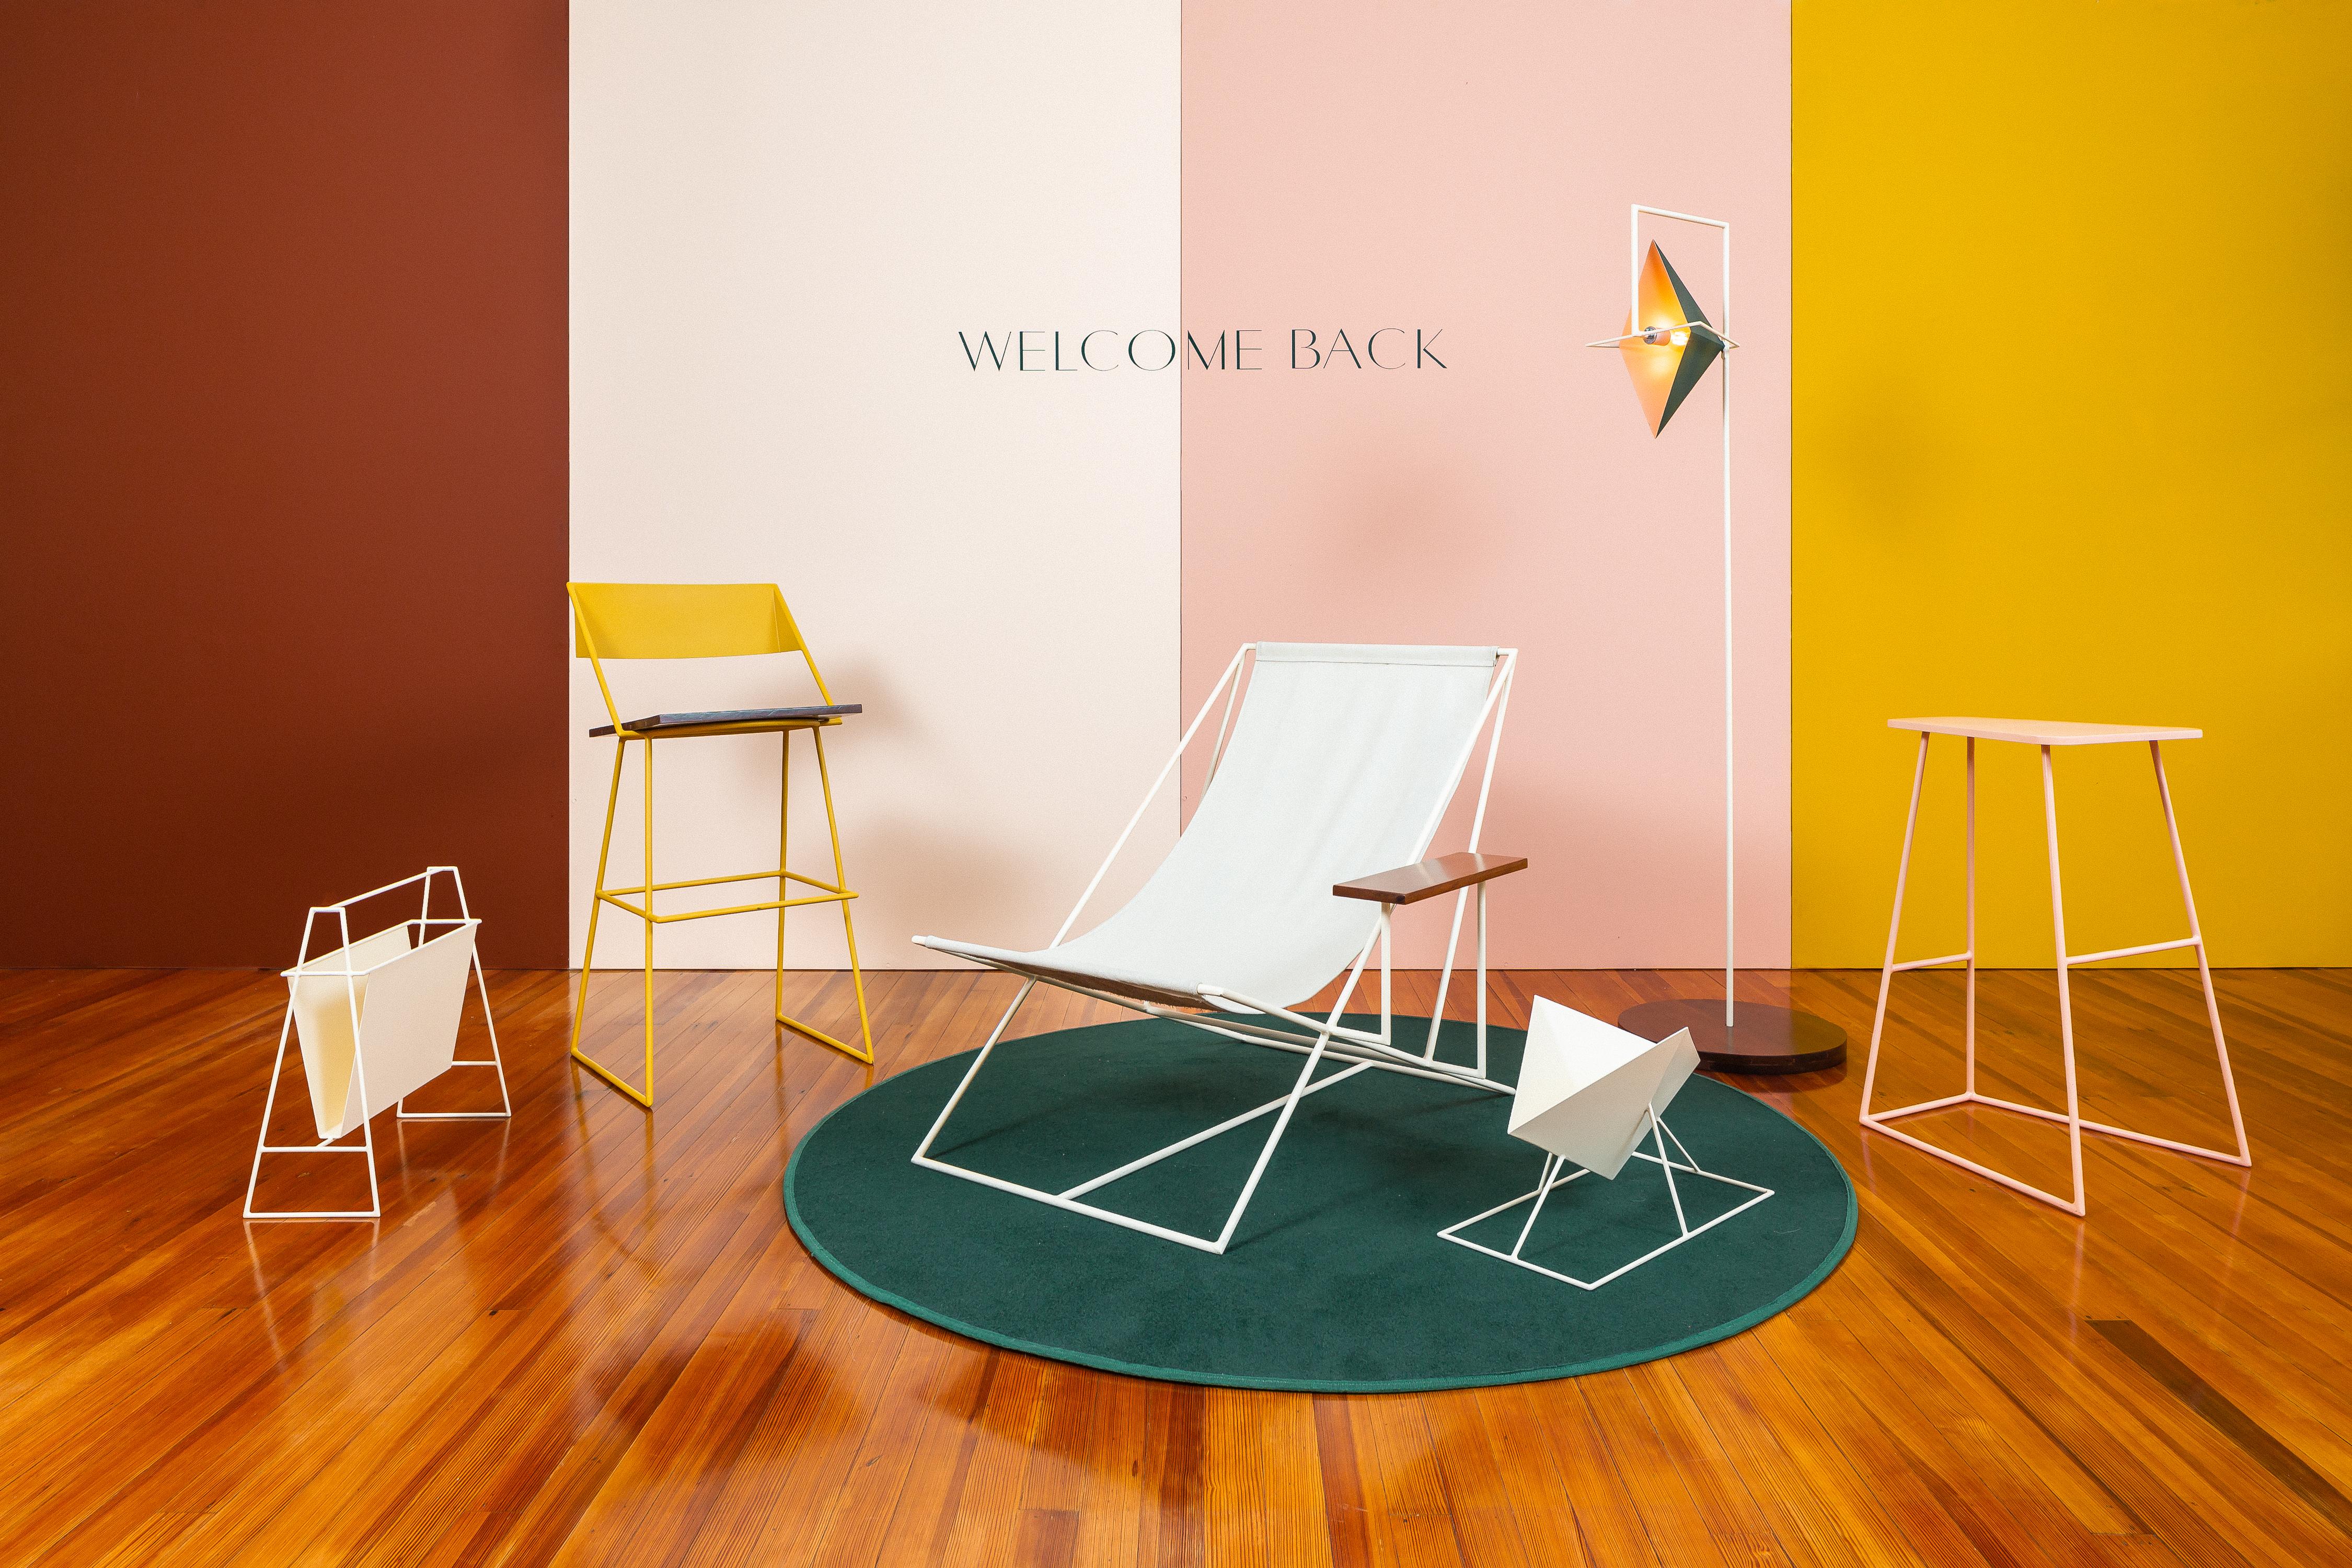 Welcome back analyzes pieces of classic furniture lost in time, and brings them to modernity, seeking to resurrect their glory, in a contemporary, futuristic and personal version. The uninhibited use of colors, materials and compositions are